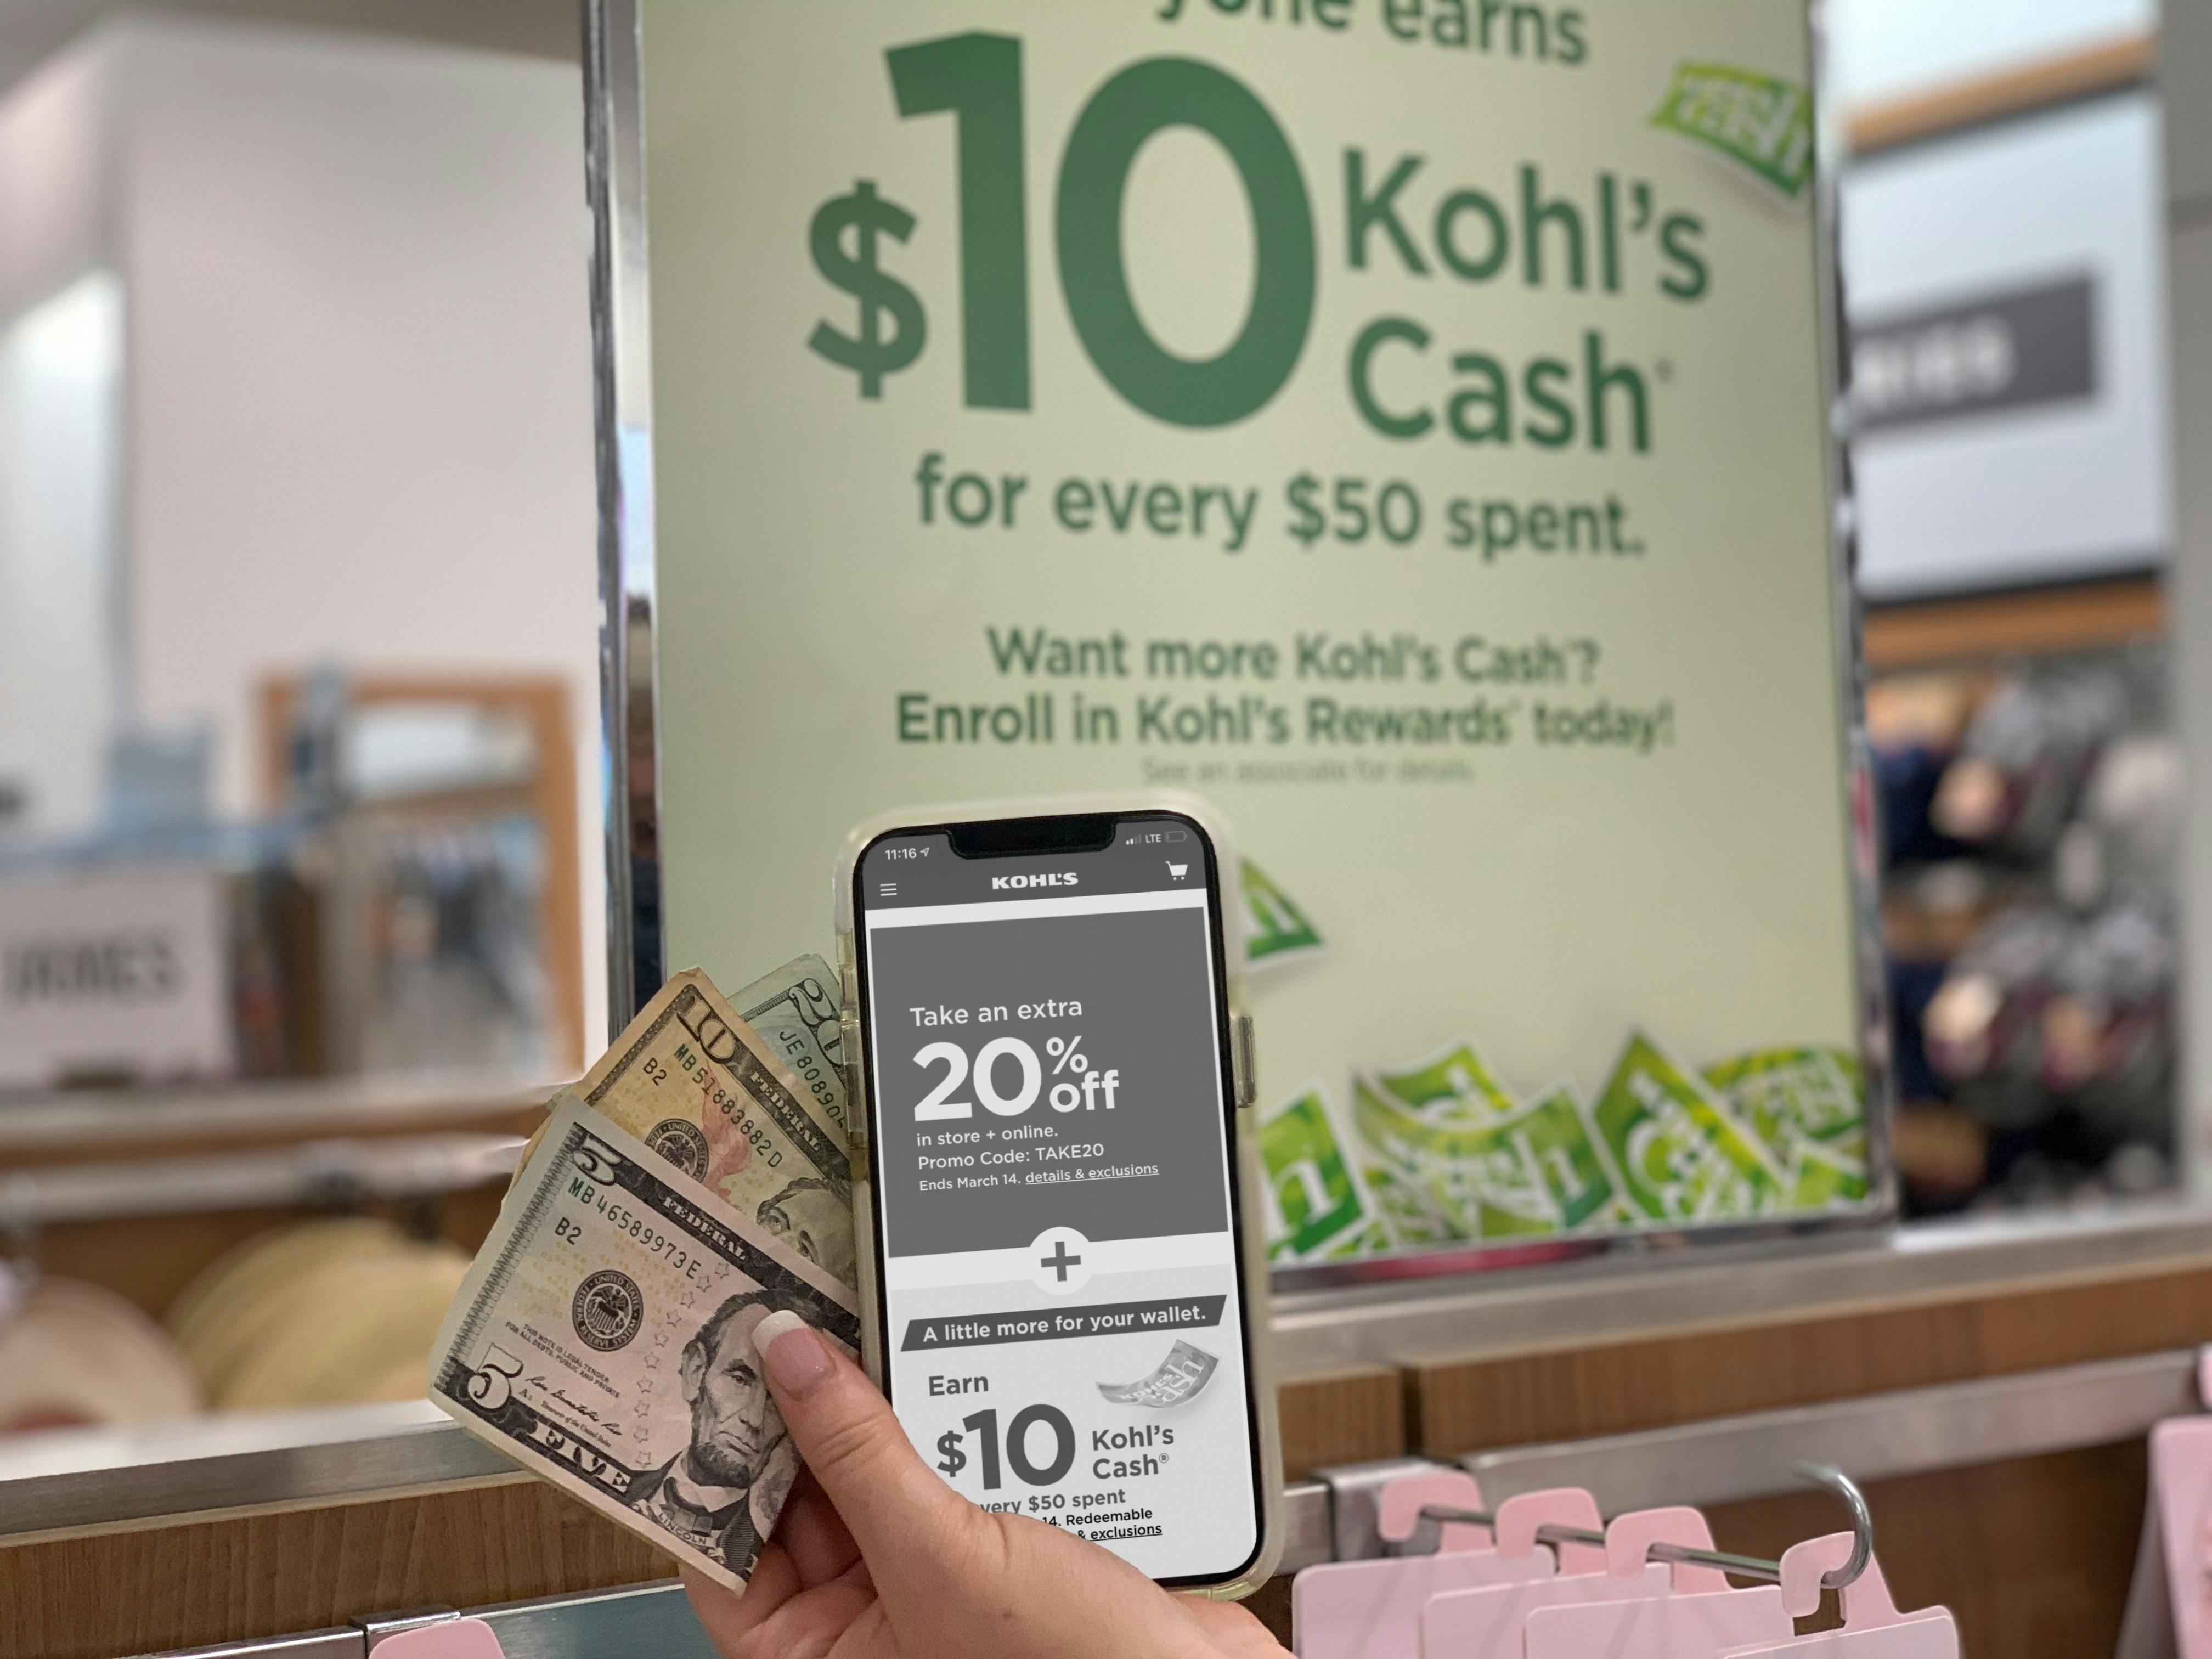 Use It or Lose It Kohl's Cash + New Kohl's Promo Codes! - Mission: to Save